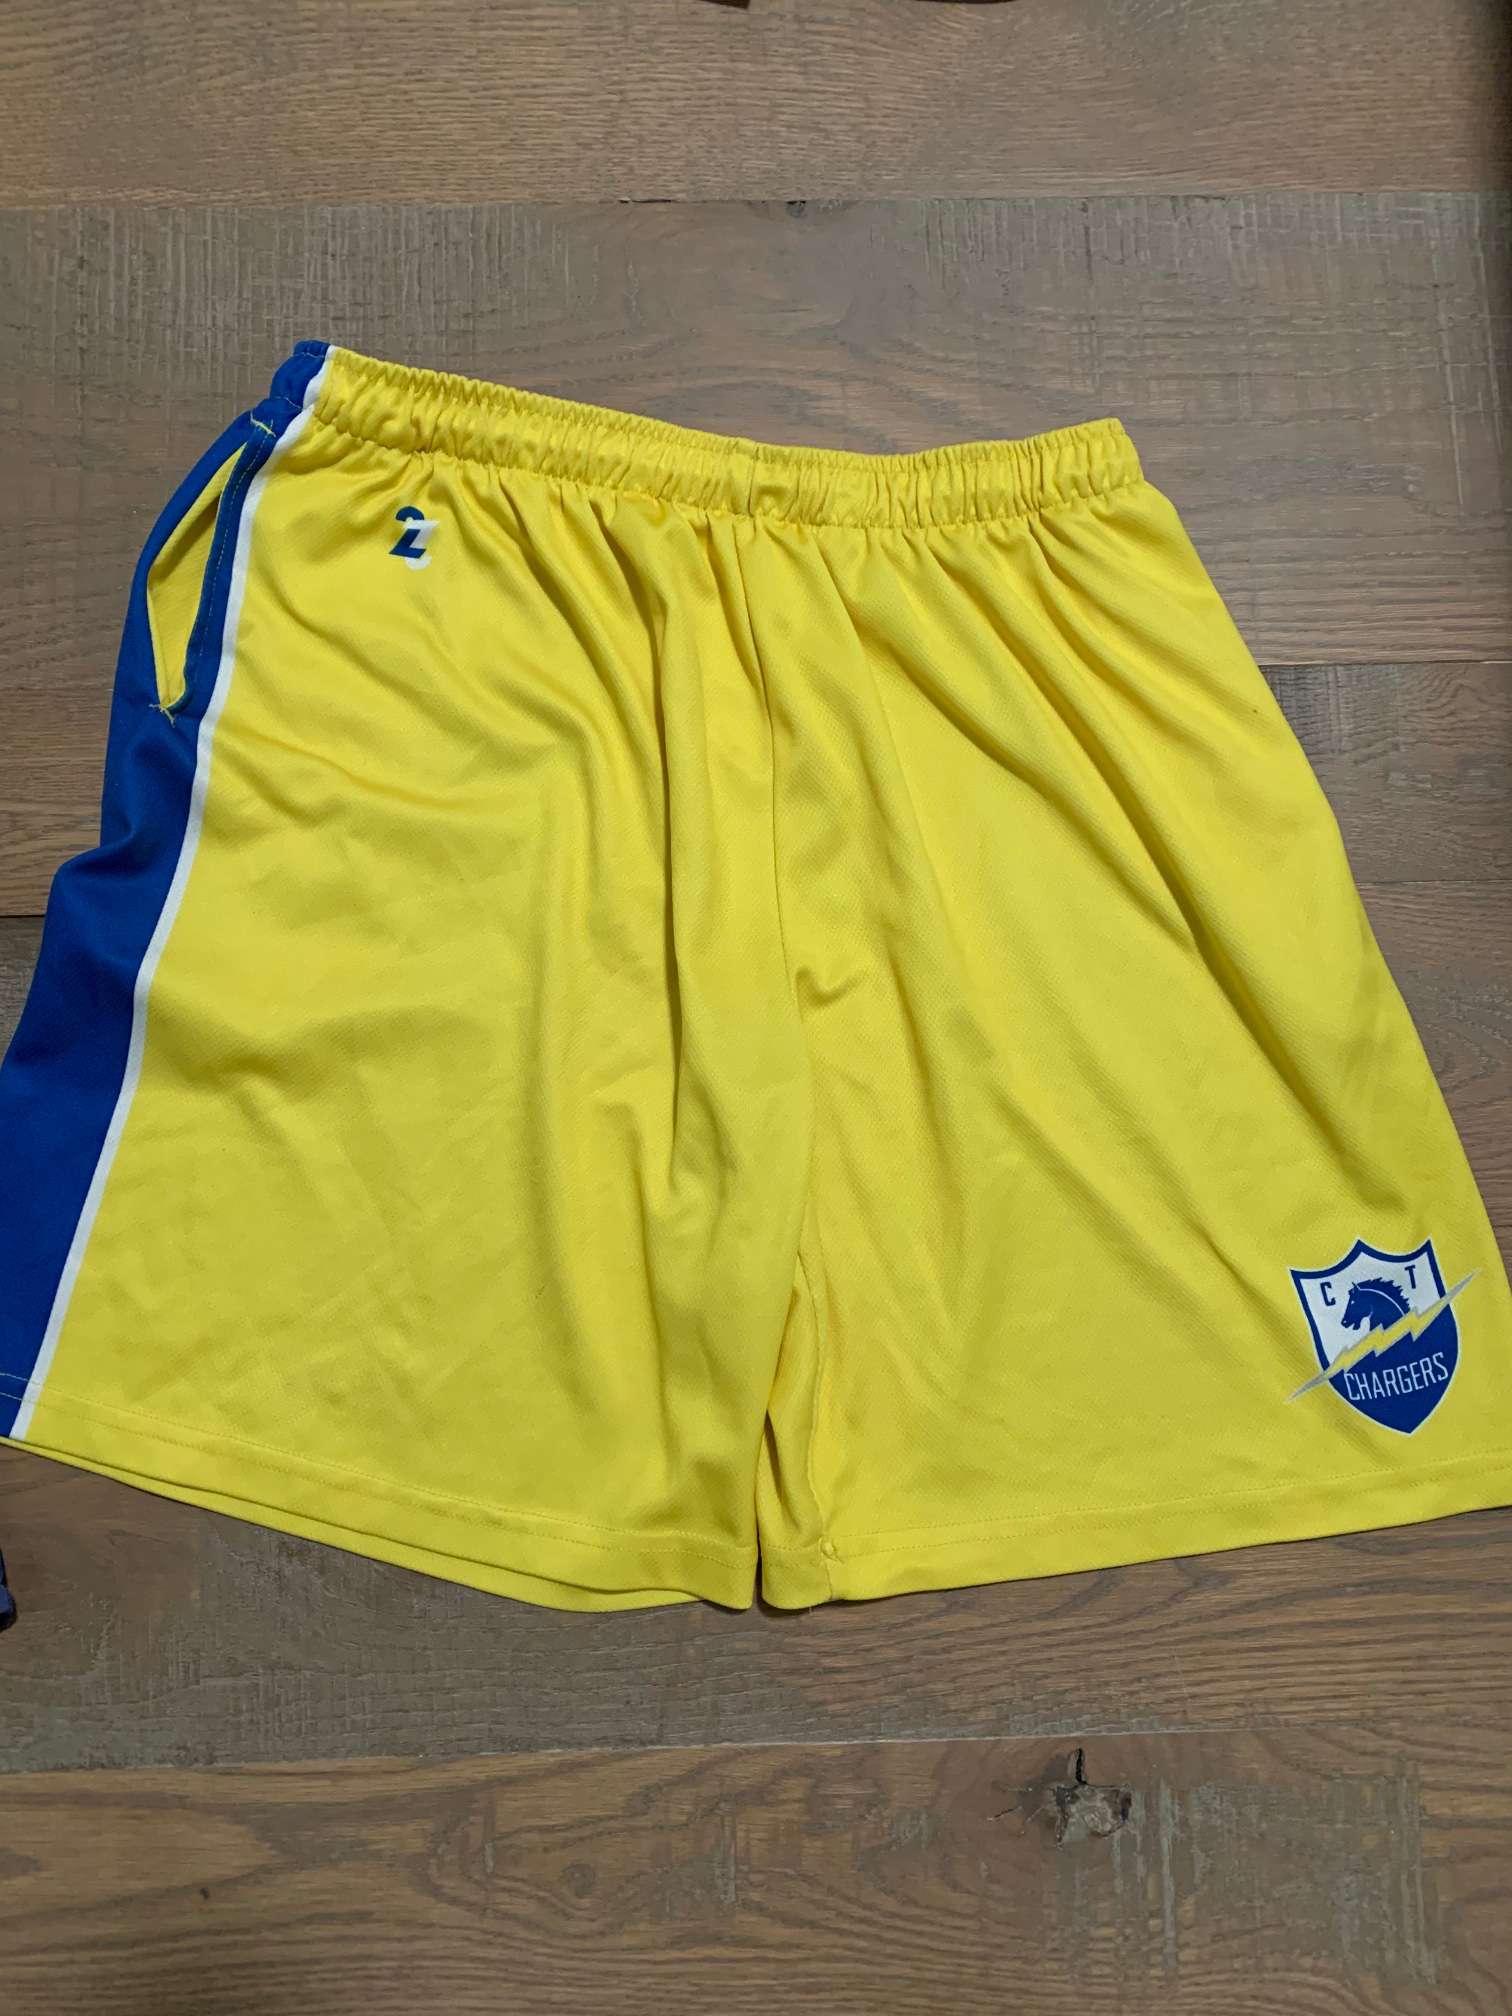 CT chargers - Yellow Used Large Shorts